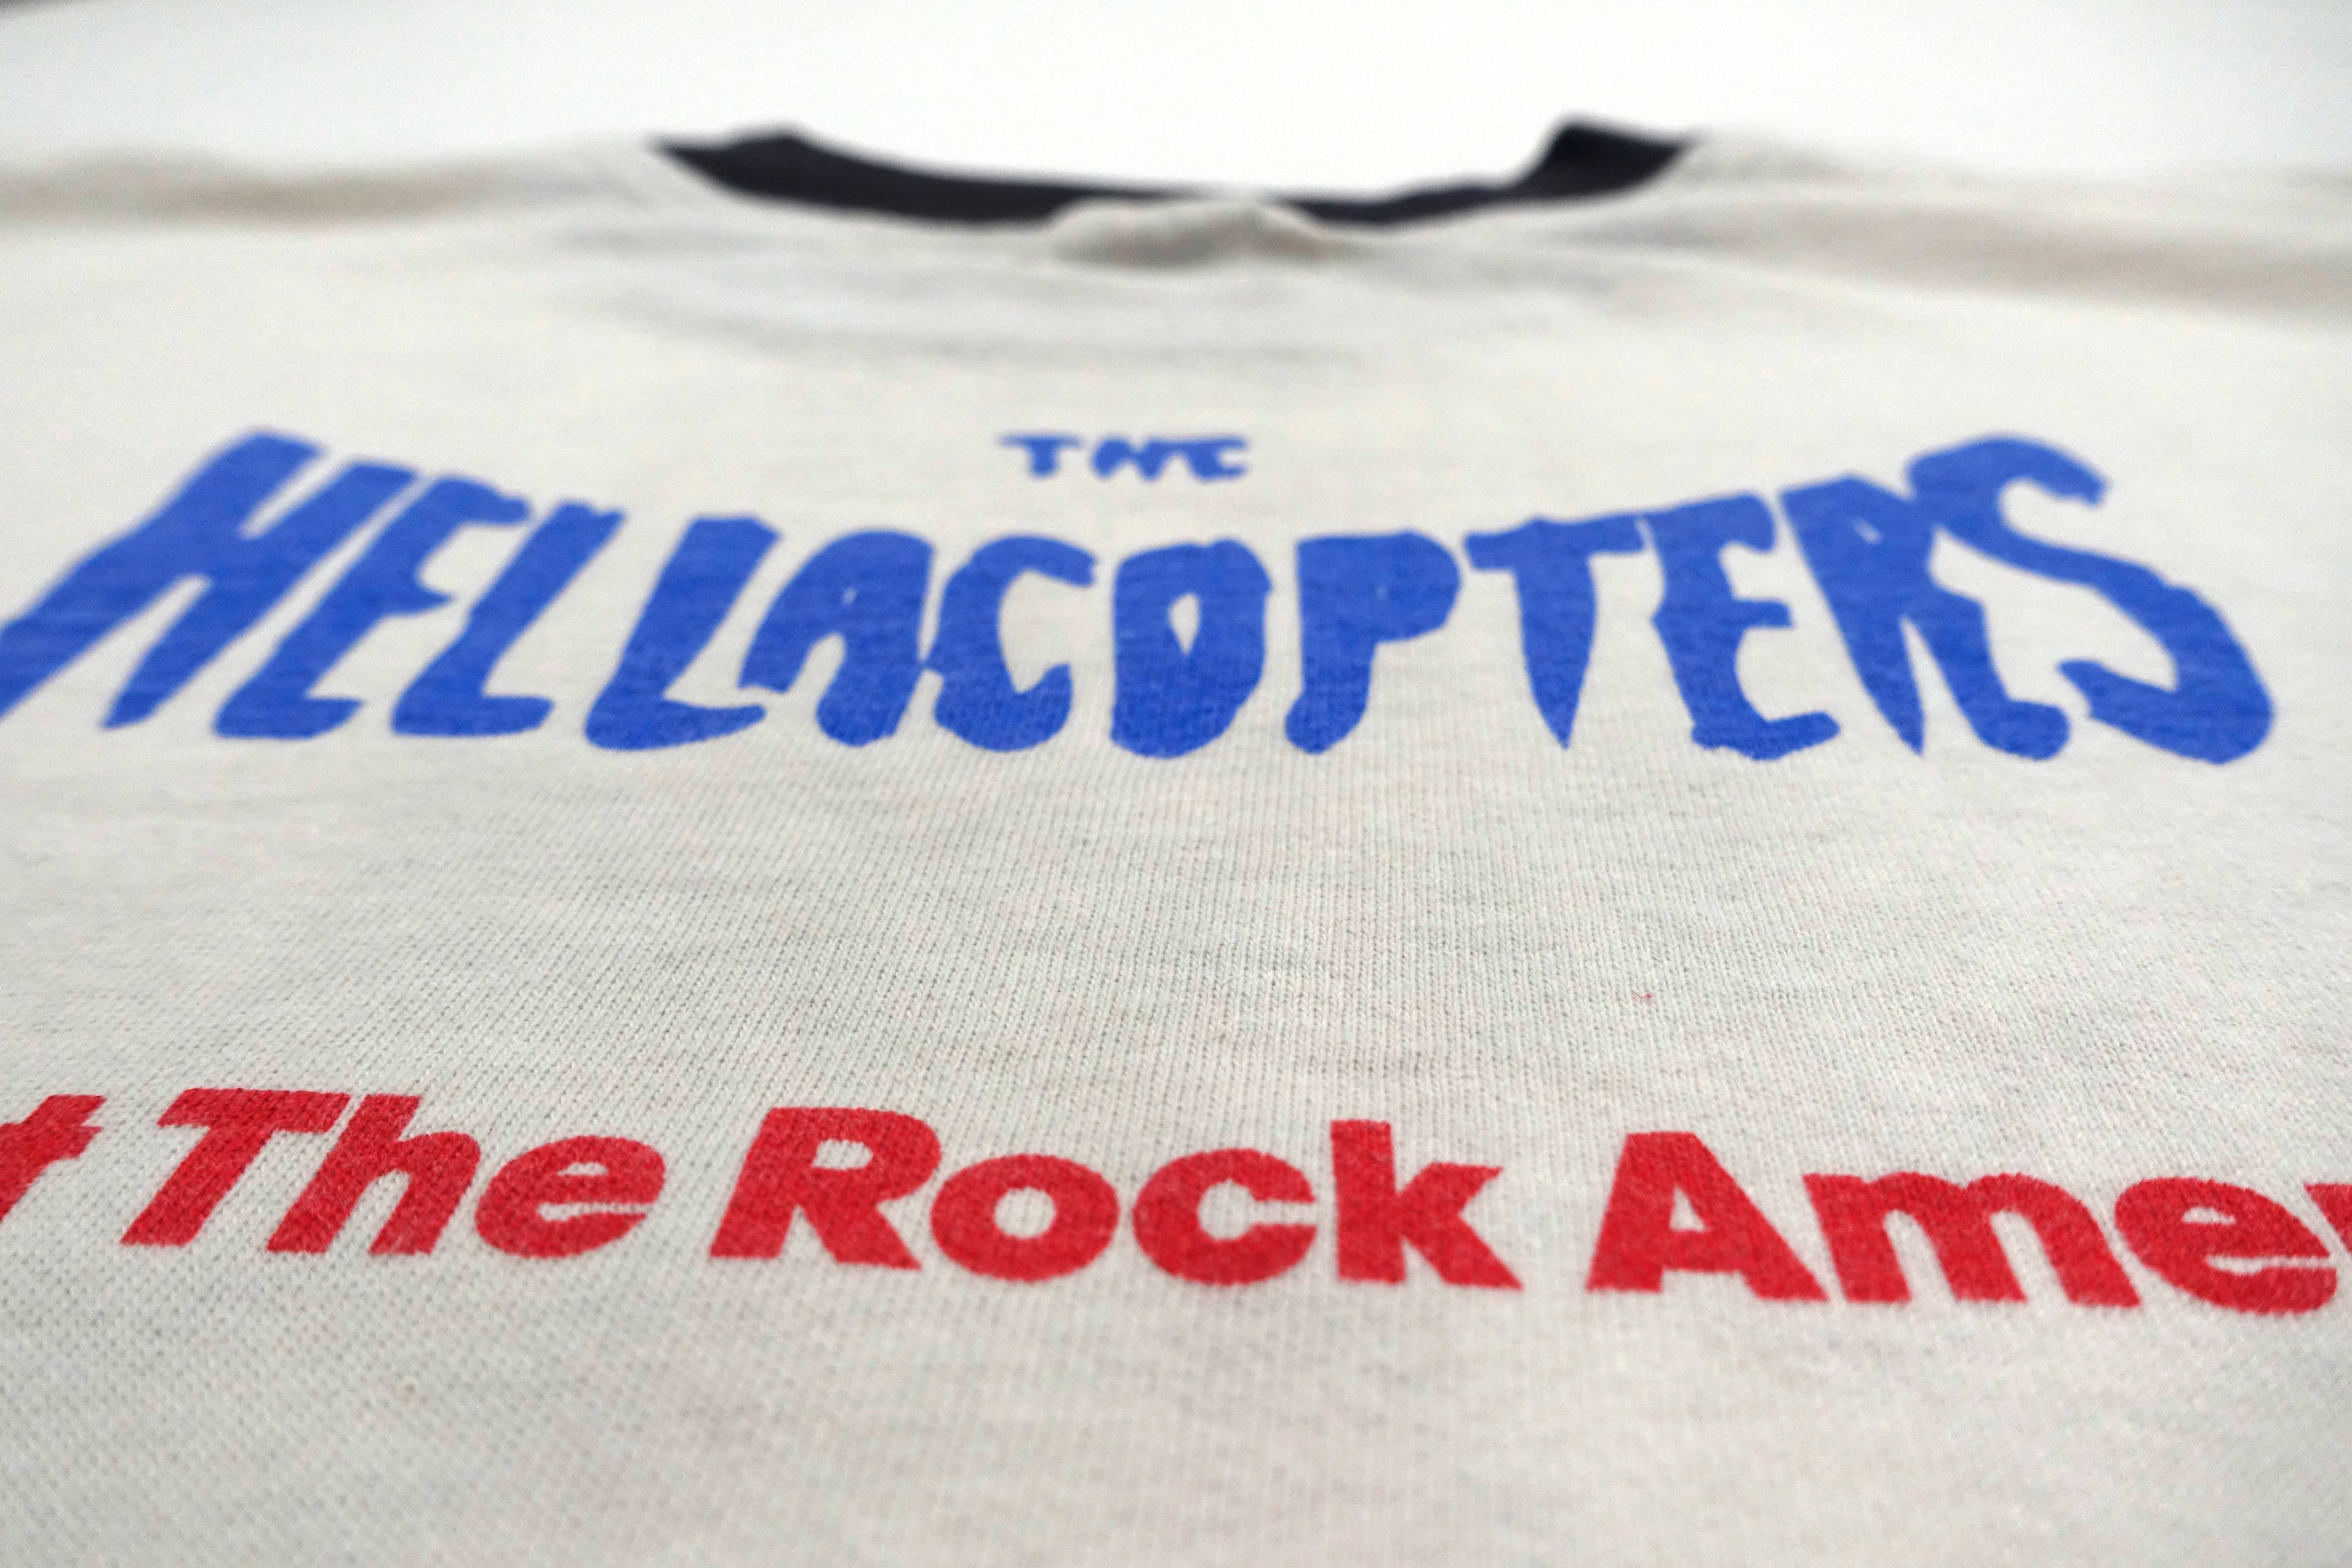 the Hellacopters - Respect The Rock America 1999 Tour Shirt Size XL